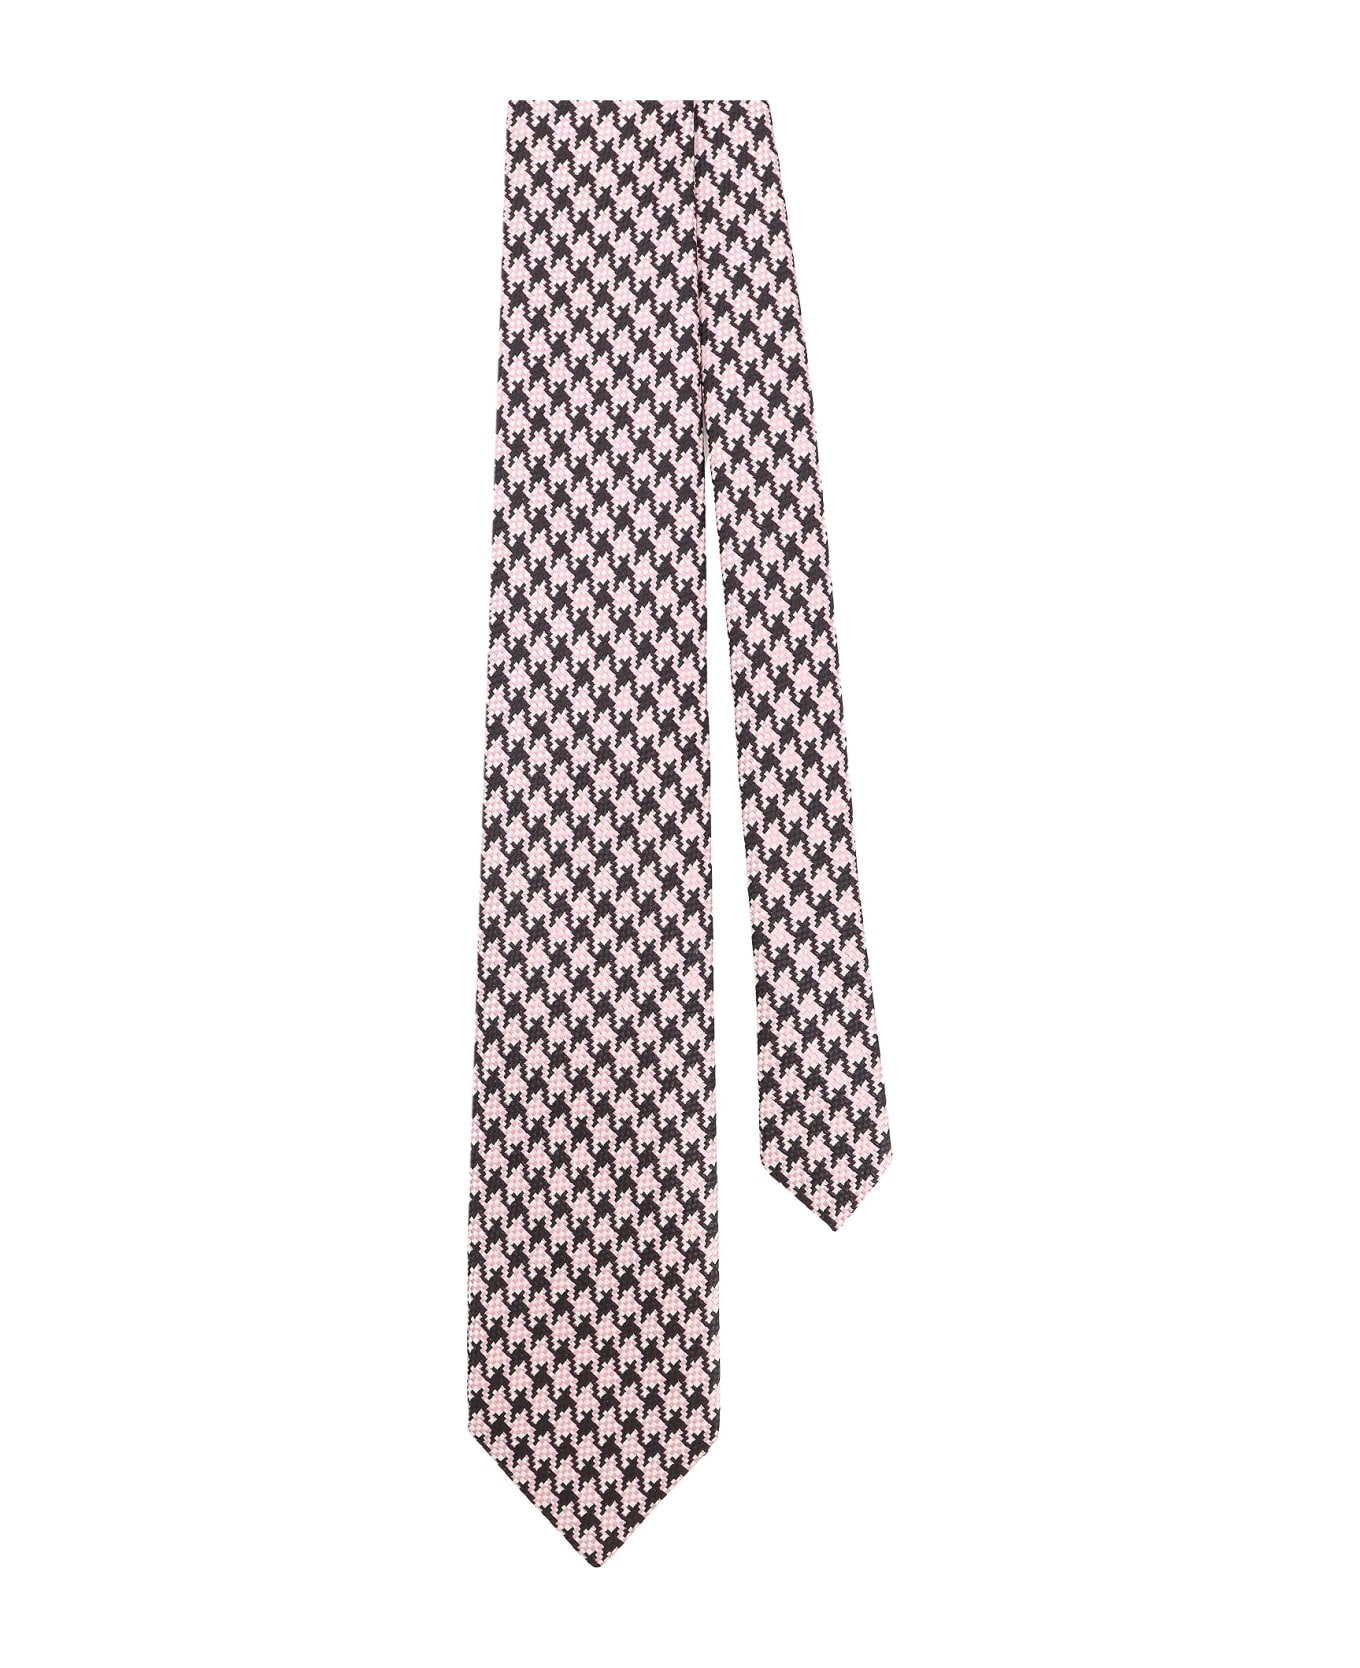 Tom Ford Tie - Pink ネクタイ